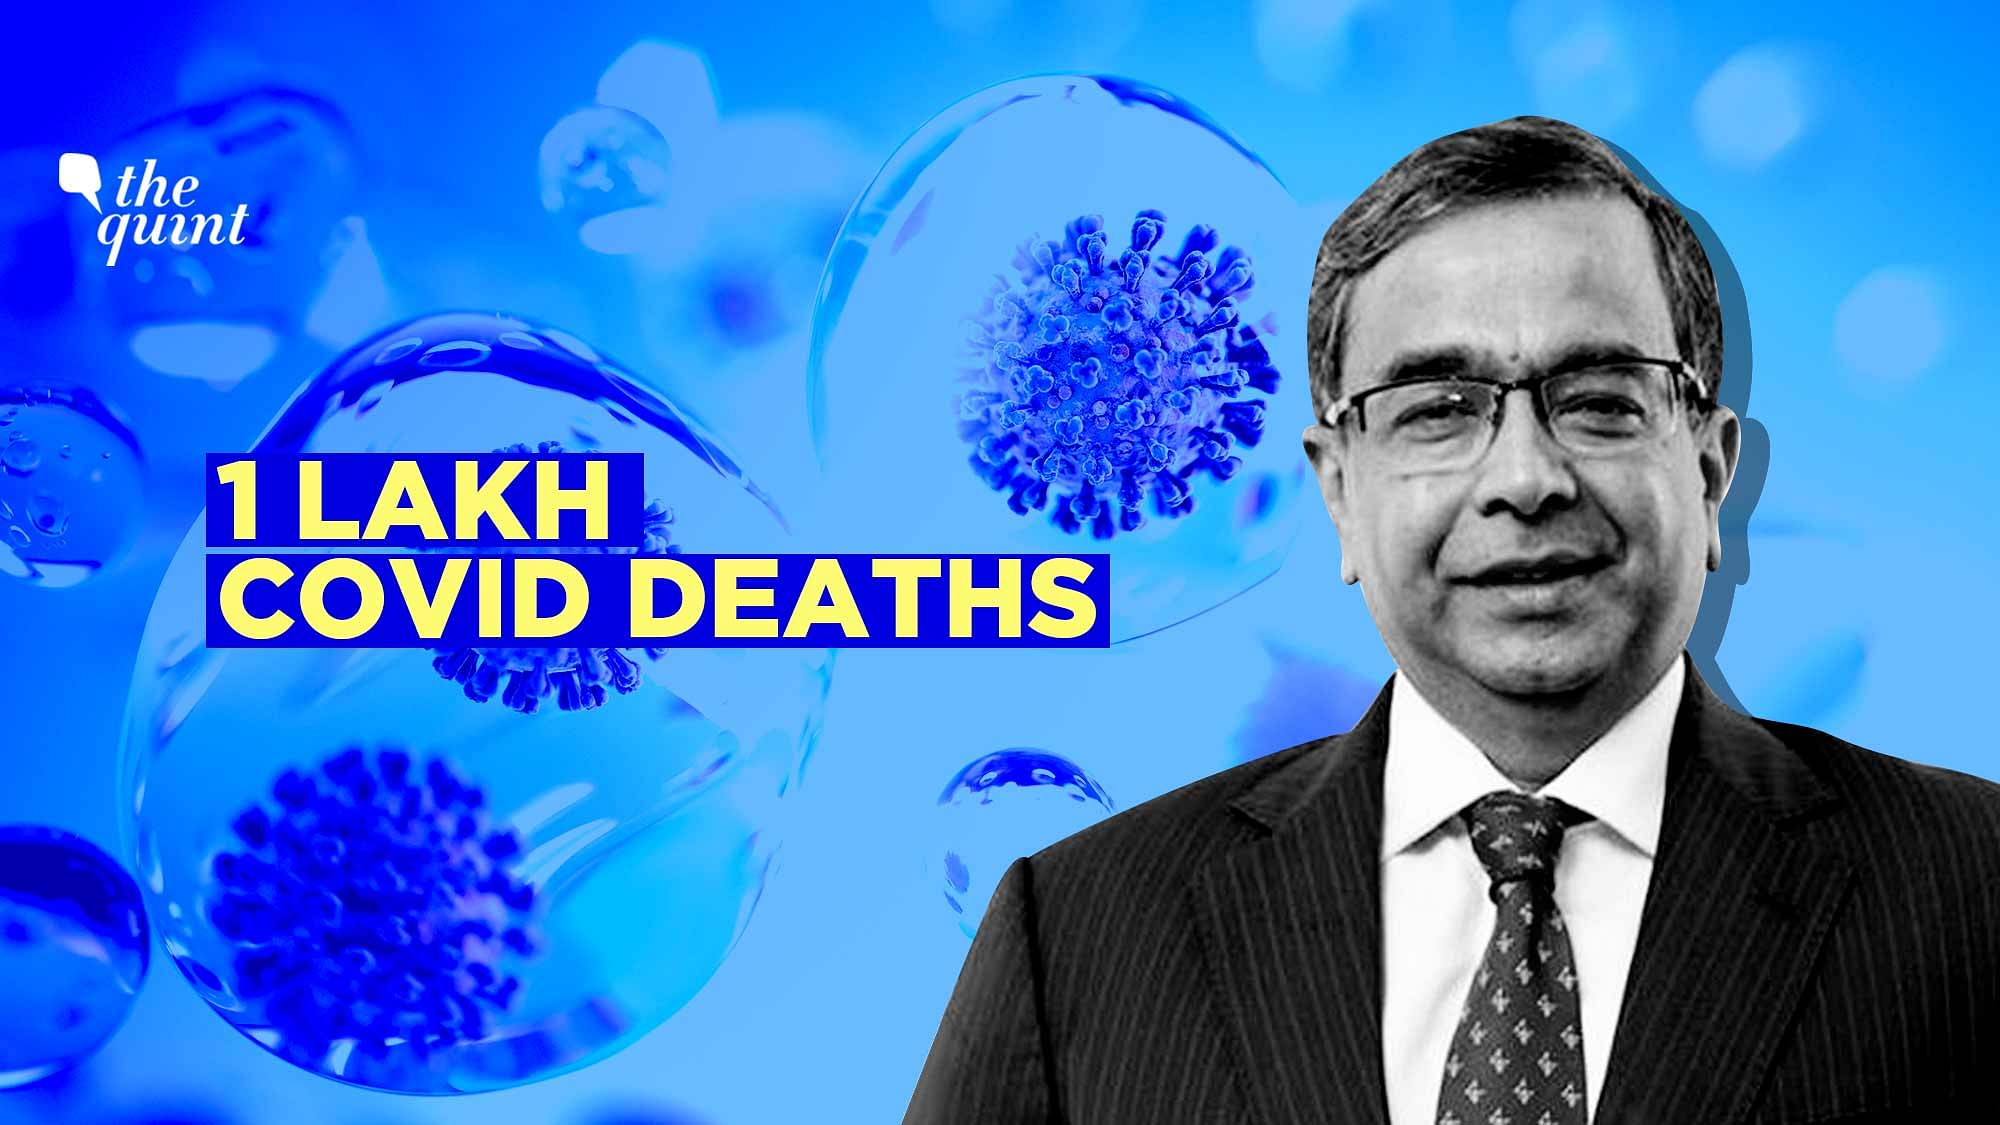 As India crosses 1 lakh coronavirus deaths, what does it mean for the country's response to the pandemic? 